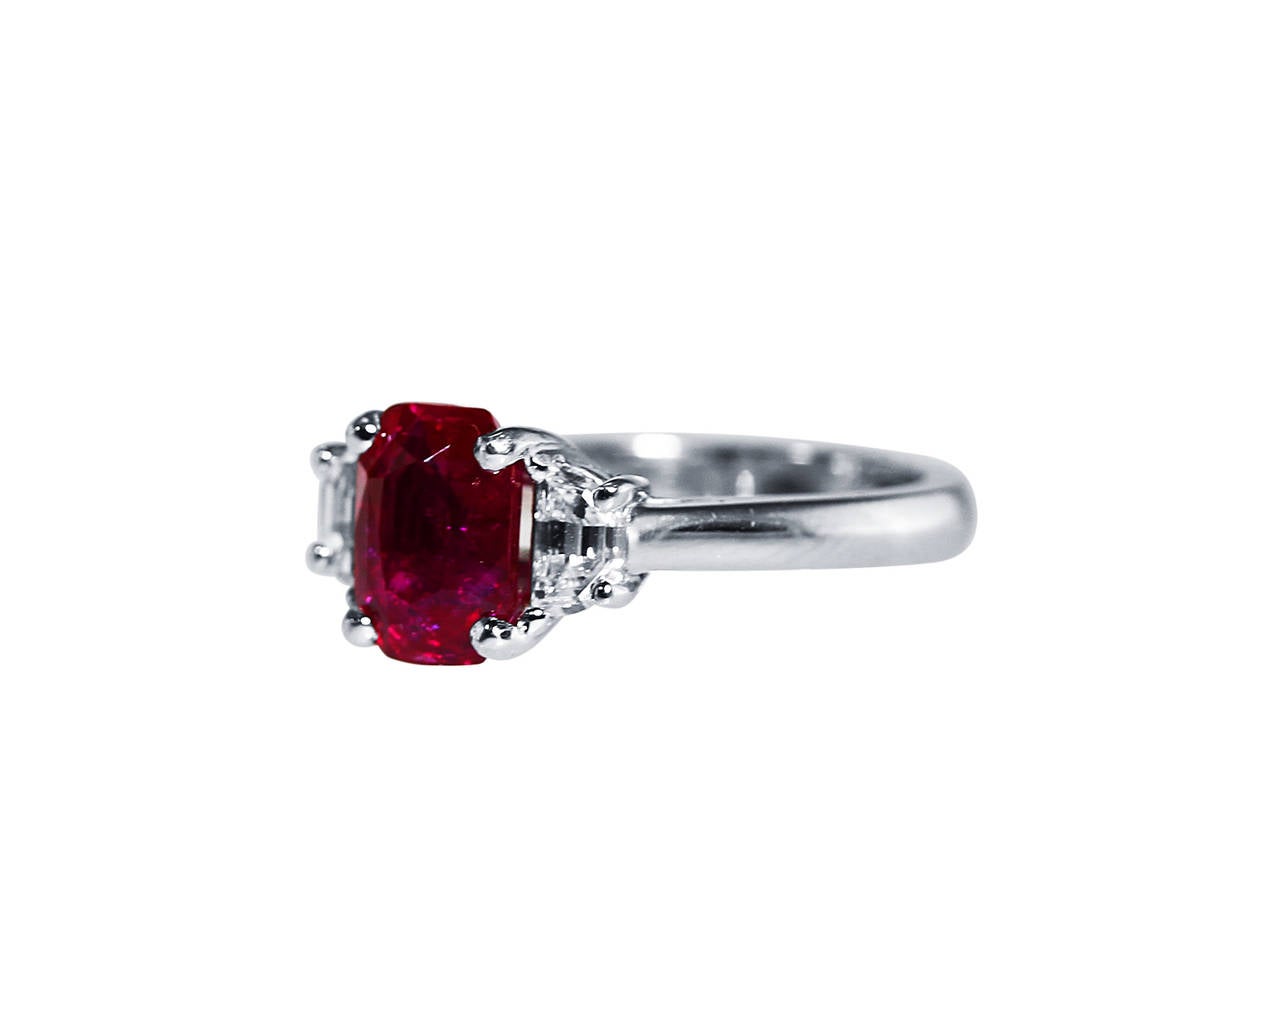 A platinum, ruby and diamond ring, set in the center with cushion-shaped ruby weighing 2.34 carats, flanked by 2 half-moon-shaped diamonds weighing approximately 0.50 carat, gross weight 7.2 grams, size 6, measuring 7/8 by 1 by 3/8